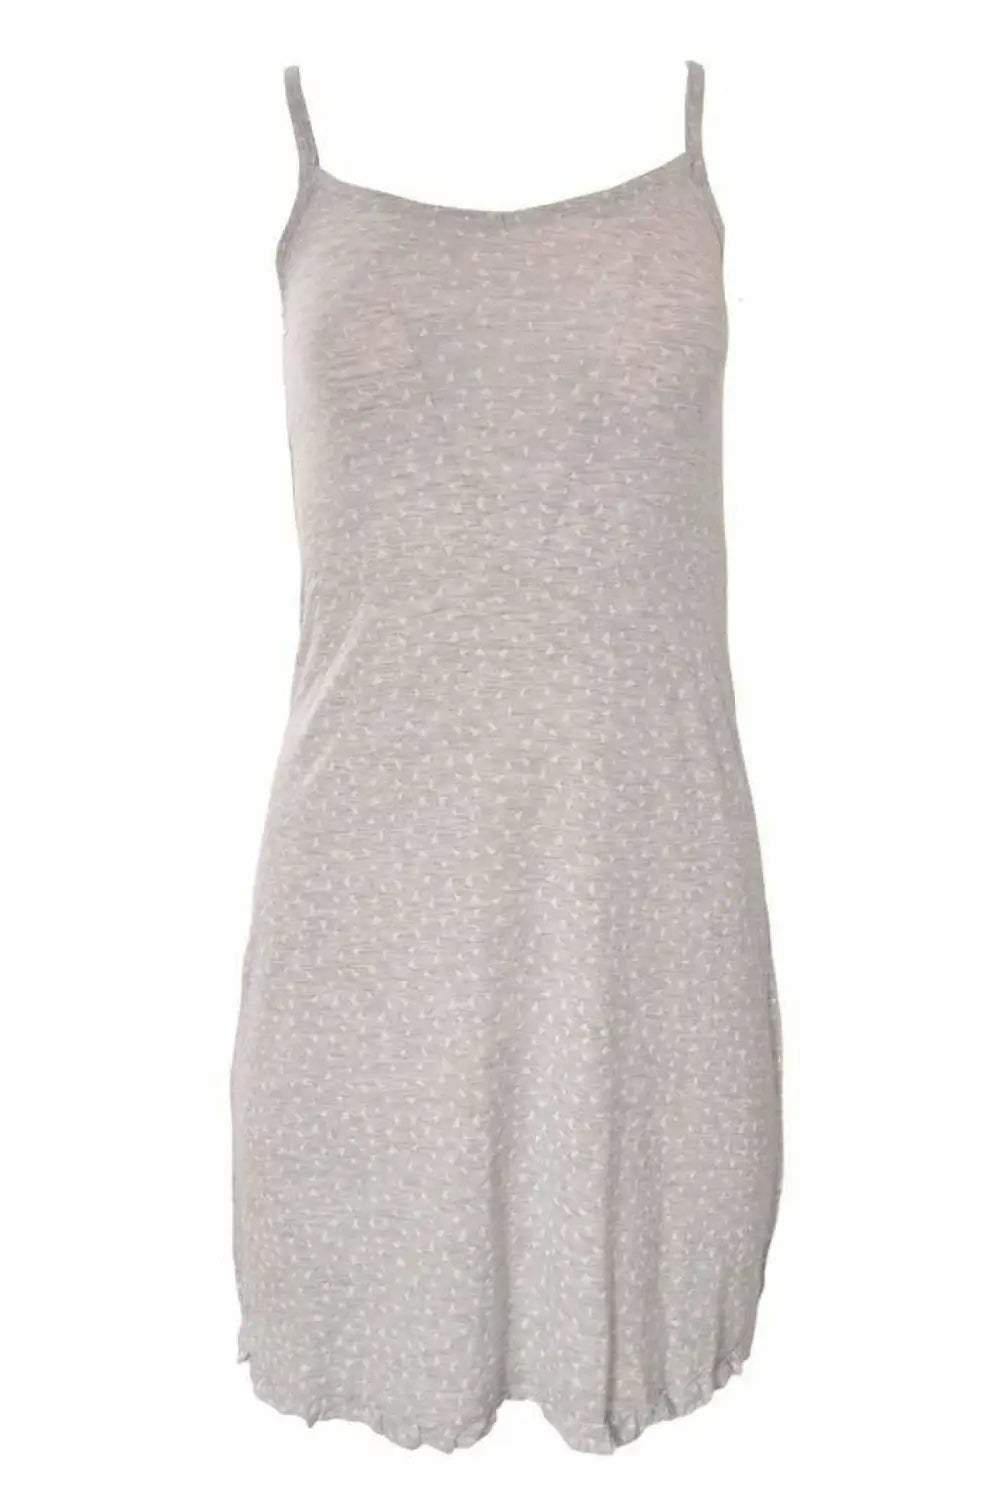 M&S Jersey Strappy Chemise